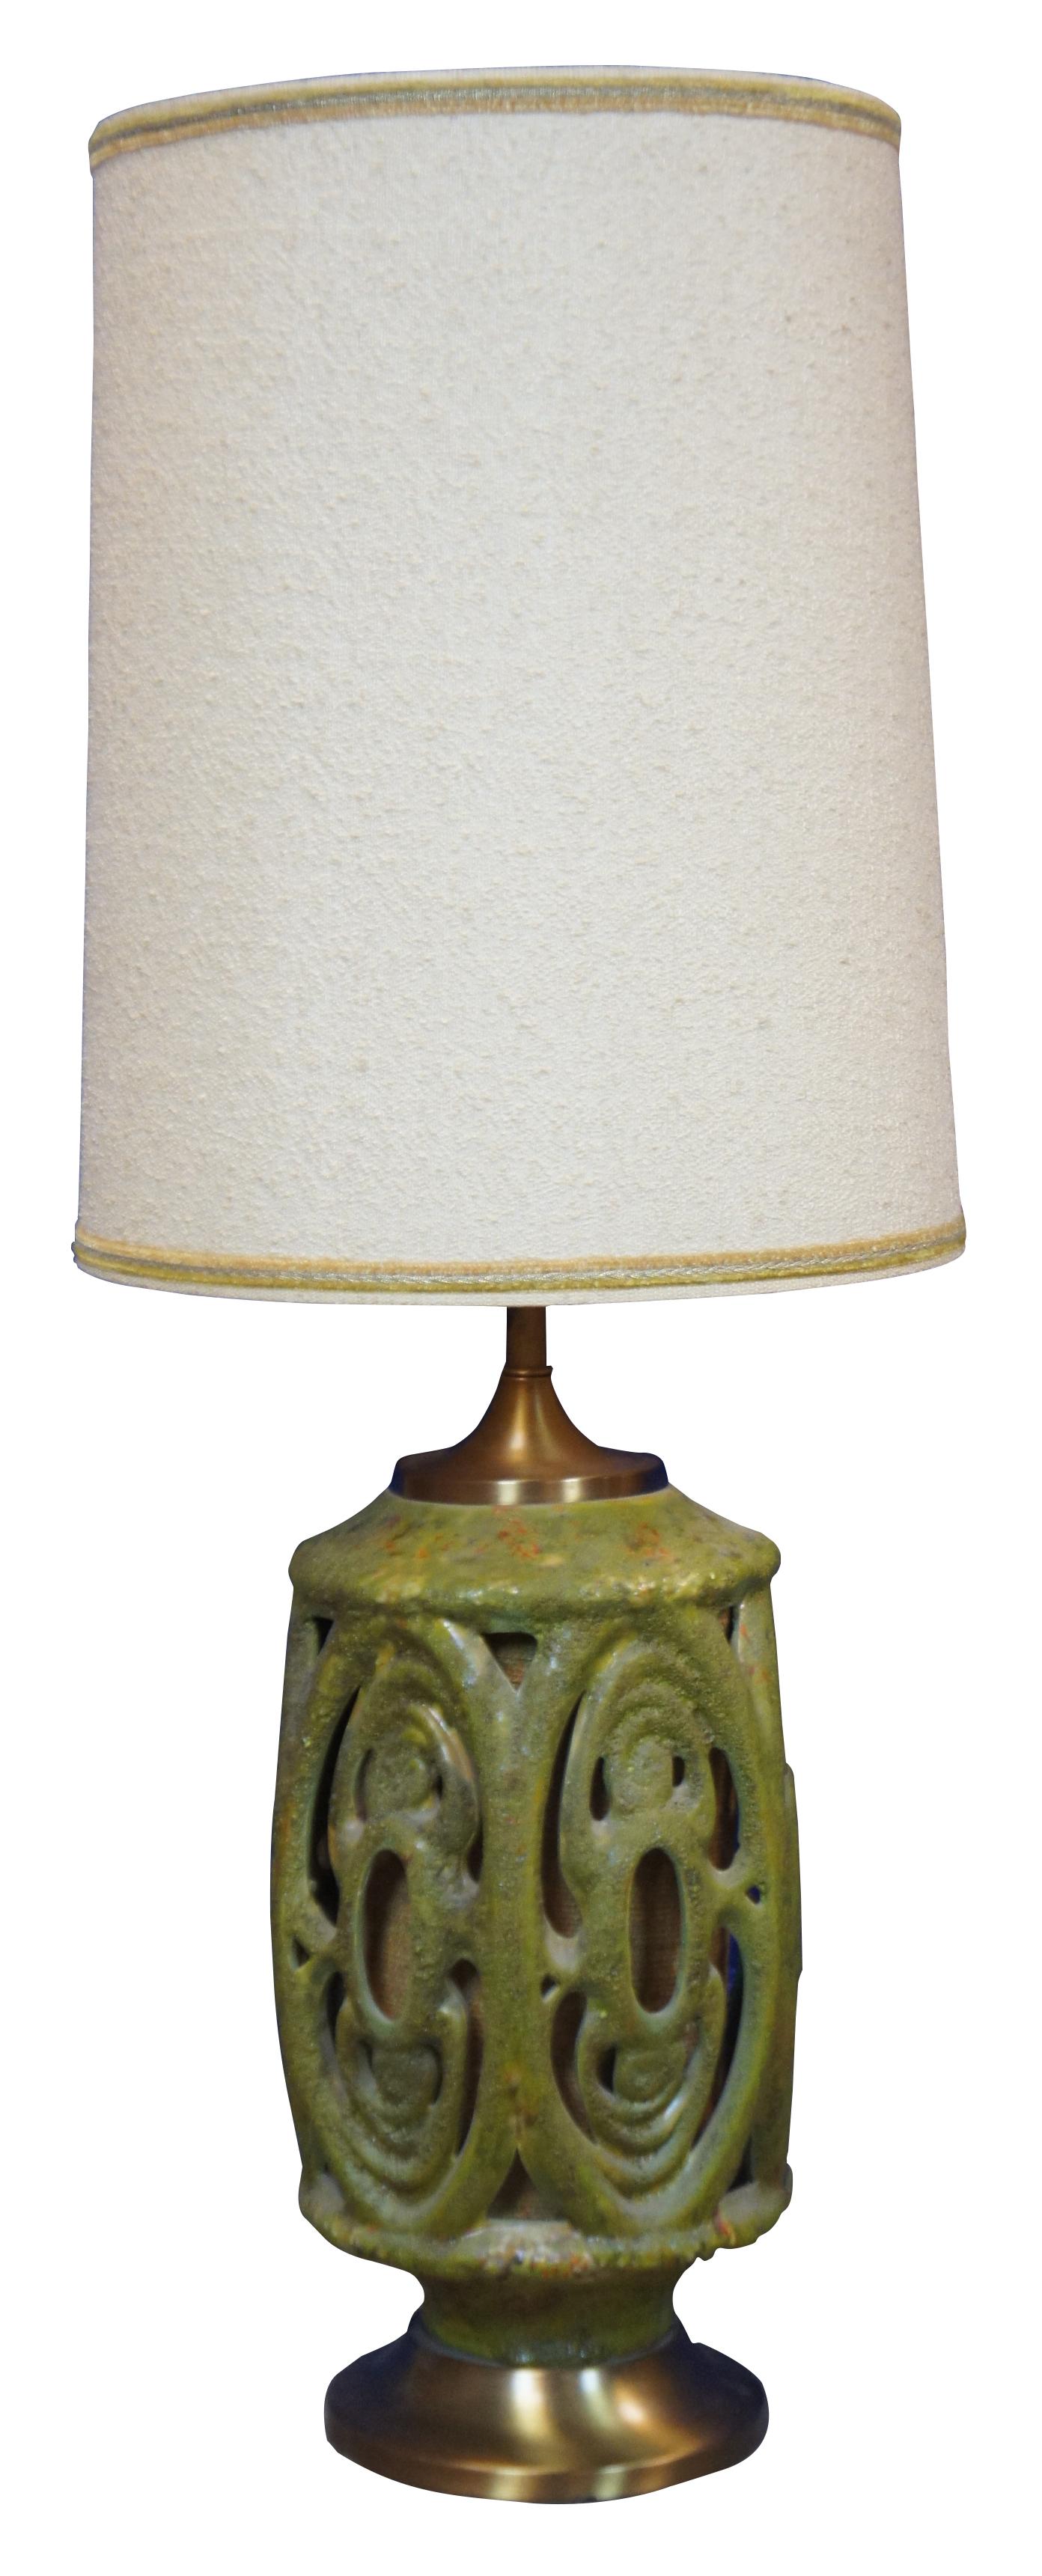 Two 1960s mid century modern cut out / reticulated ceramic table lamps in green and orange lava glaze over a matching burlap core with large barrel shades. Marked Wescal on the harps.

Measures: 9.5” x 24” / Shade - 16” x 20” (Diameter x Height).